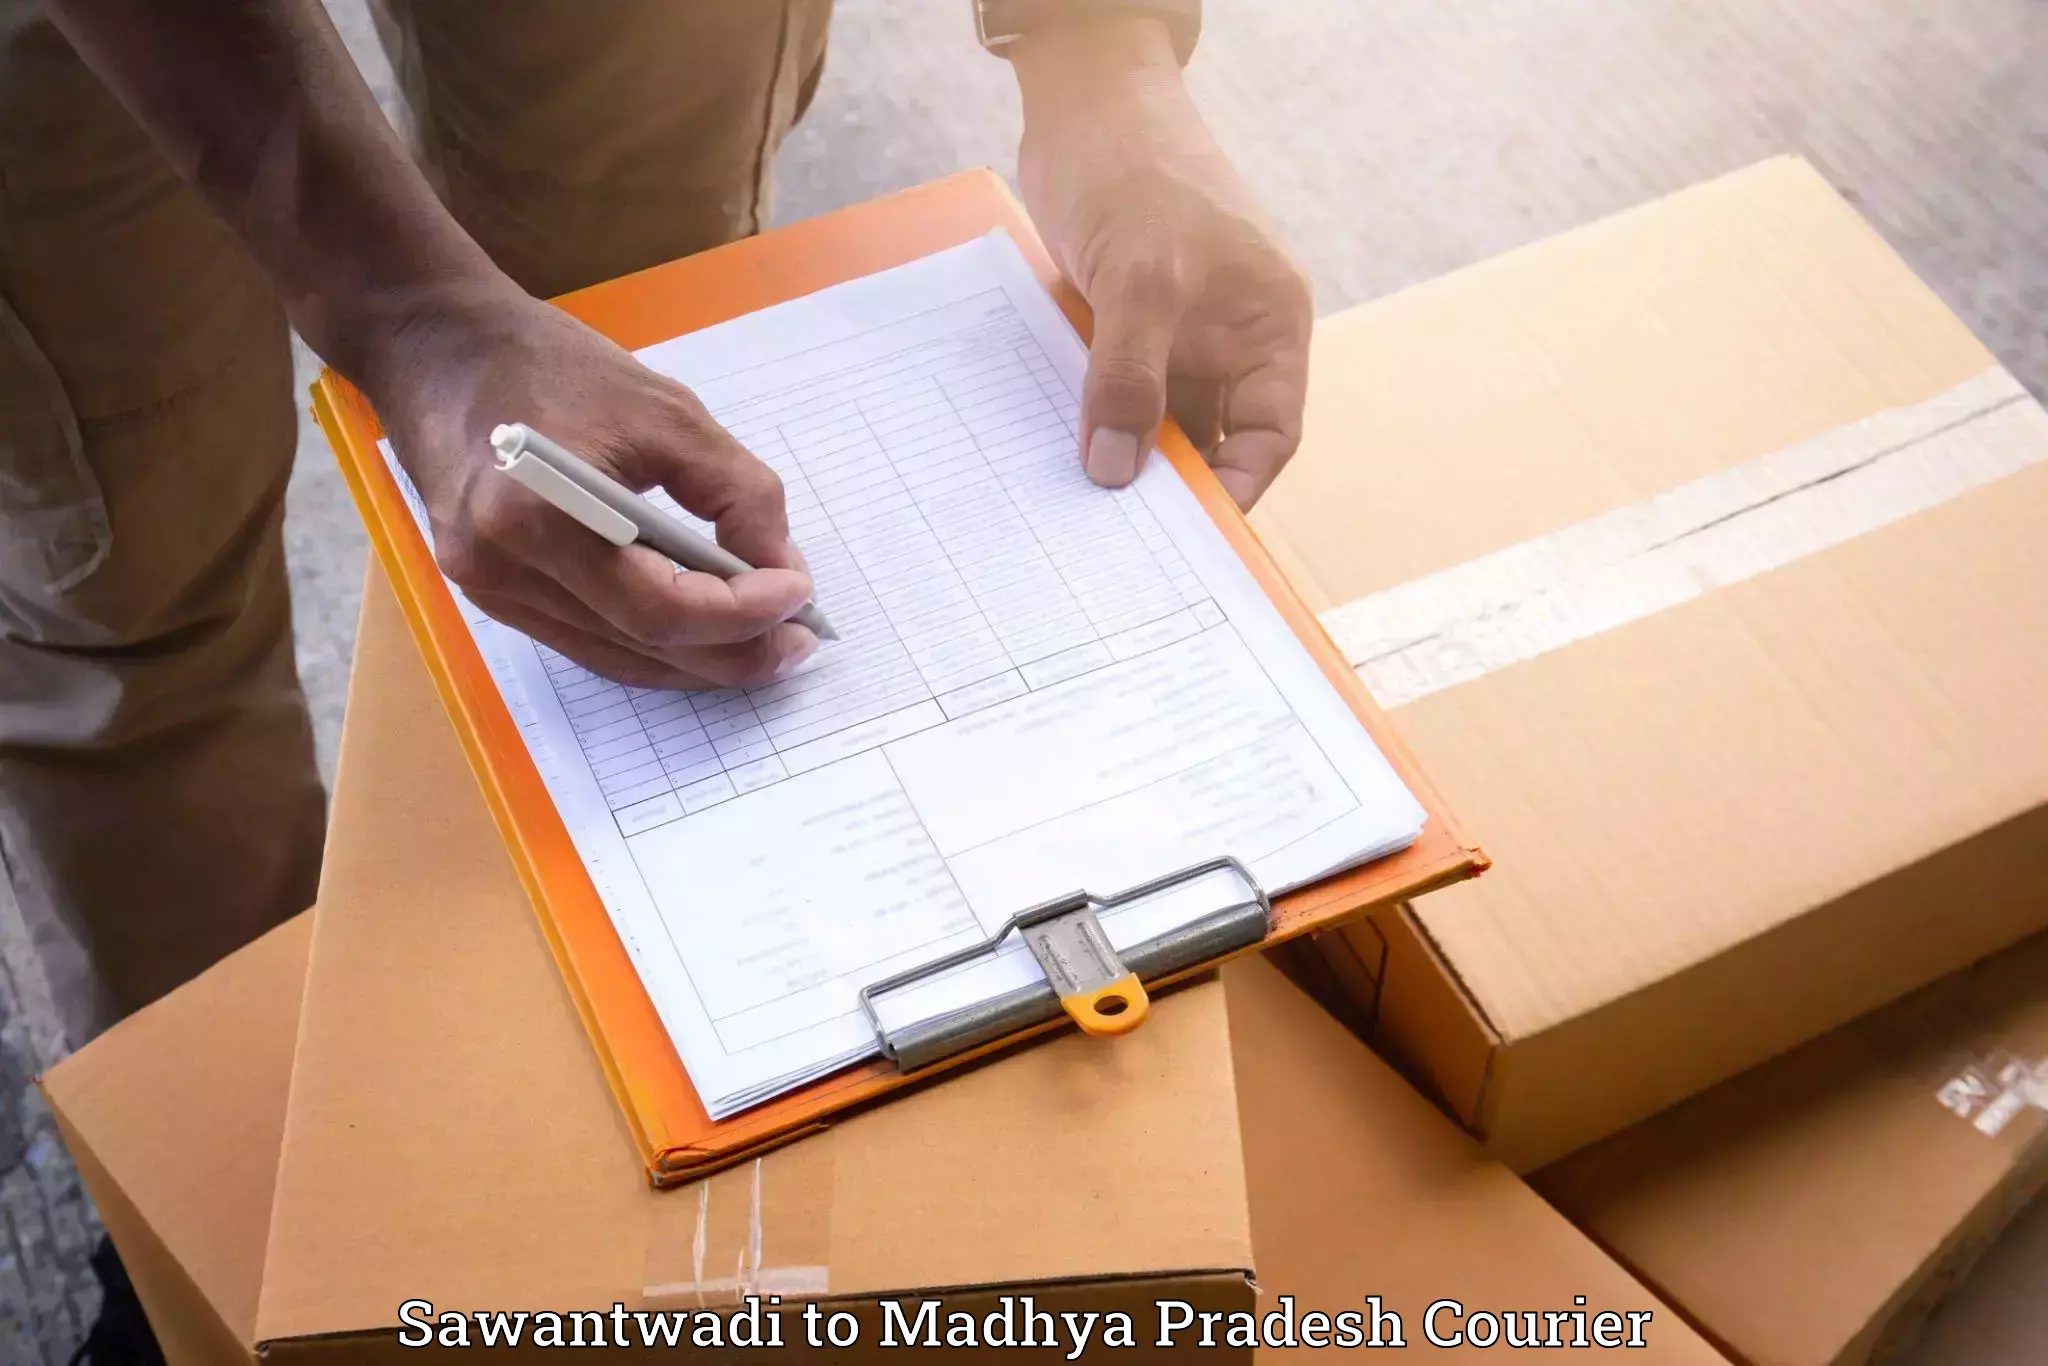 Budget-friendly movers Sawantwadi to IIT Indore